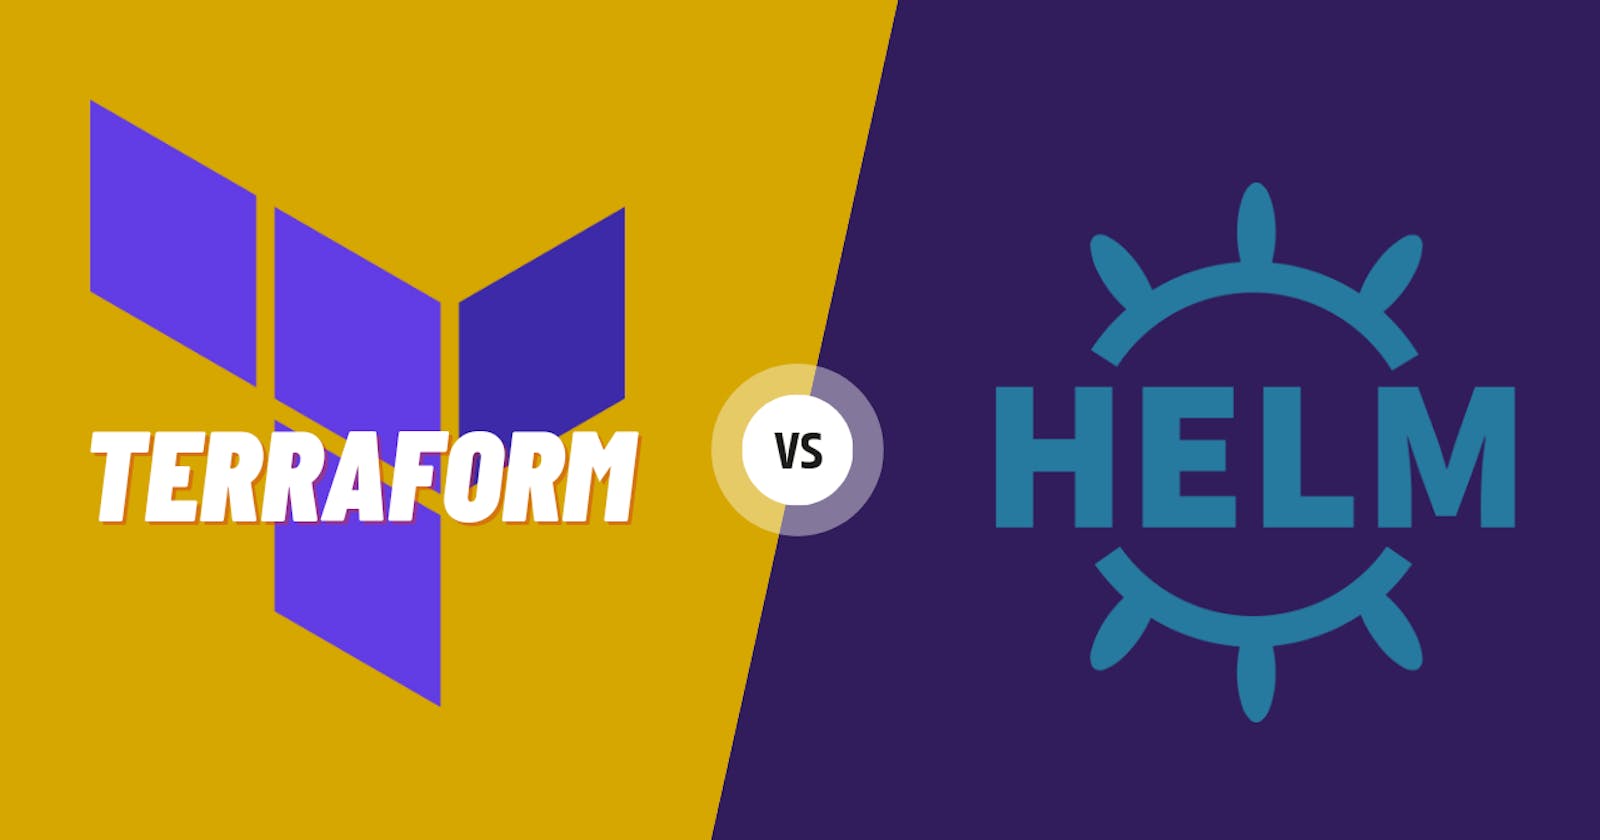 Terraform vs helm -  Features and differences